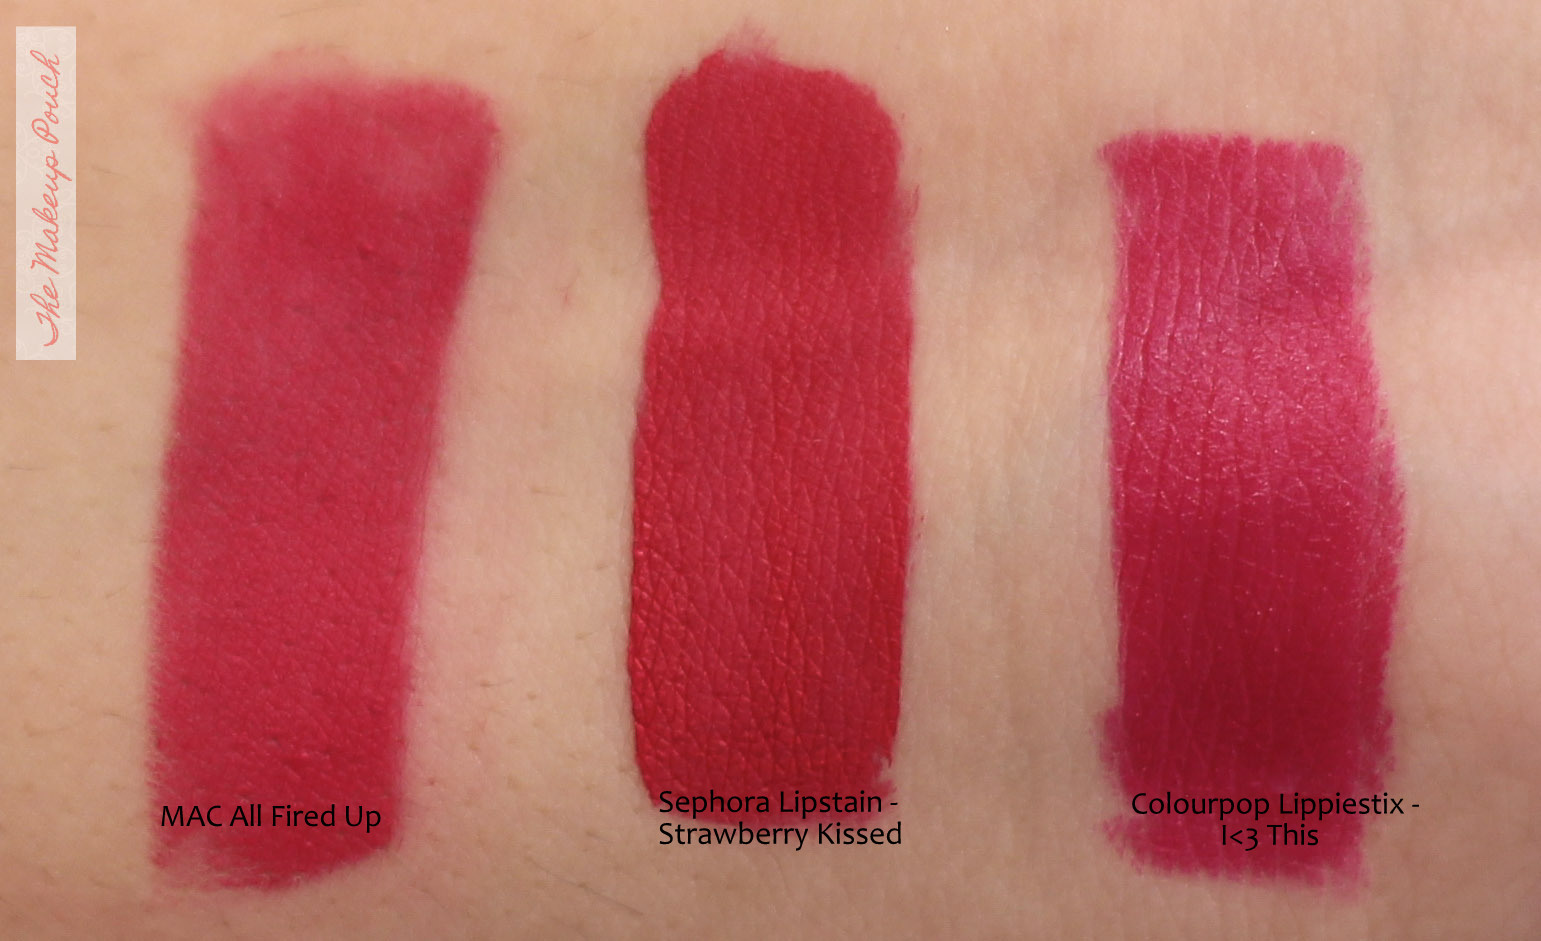 Jeffree Star Cherry Wet Velour Liquid Lipstick Prediction Dupes - All In The Blush